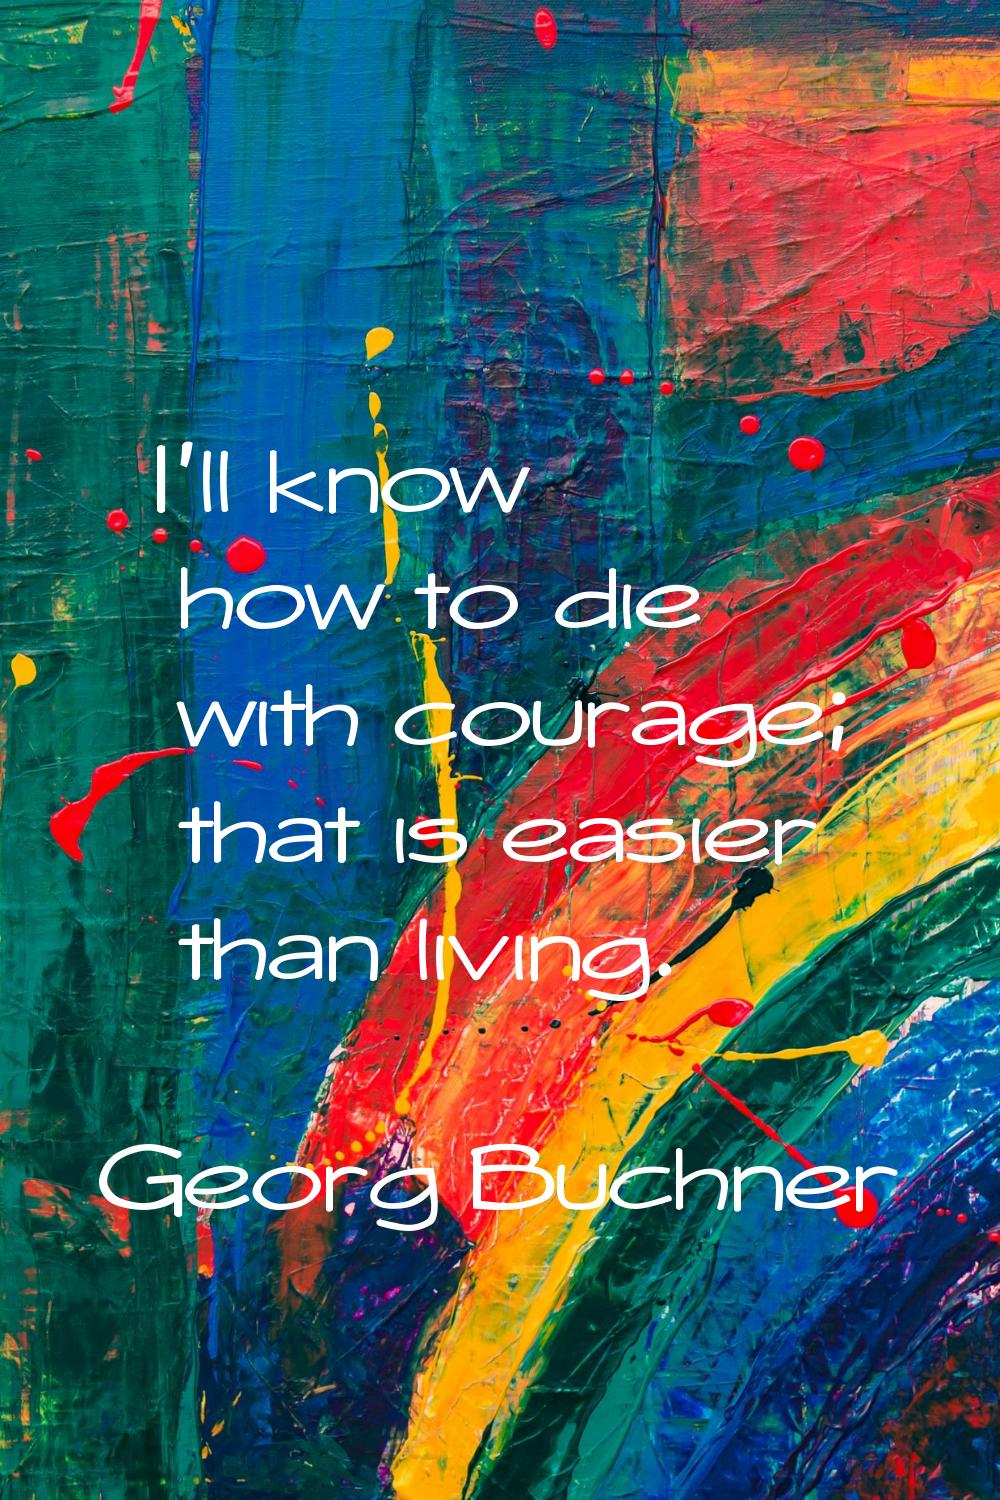 I'll know how to die with courage; that is easier than living.